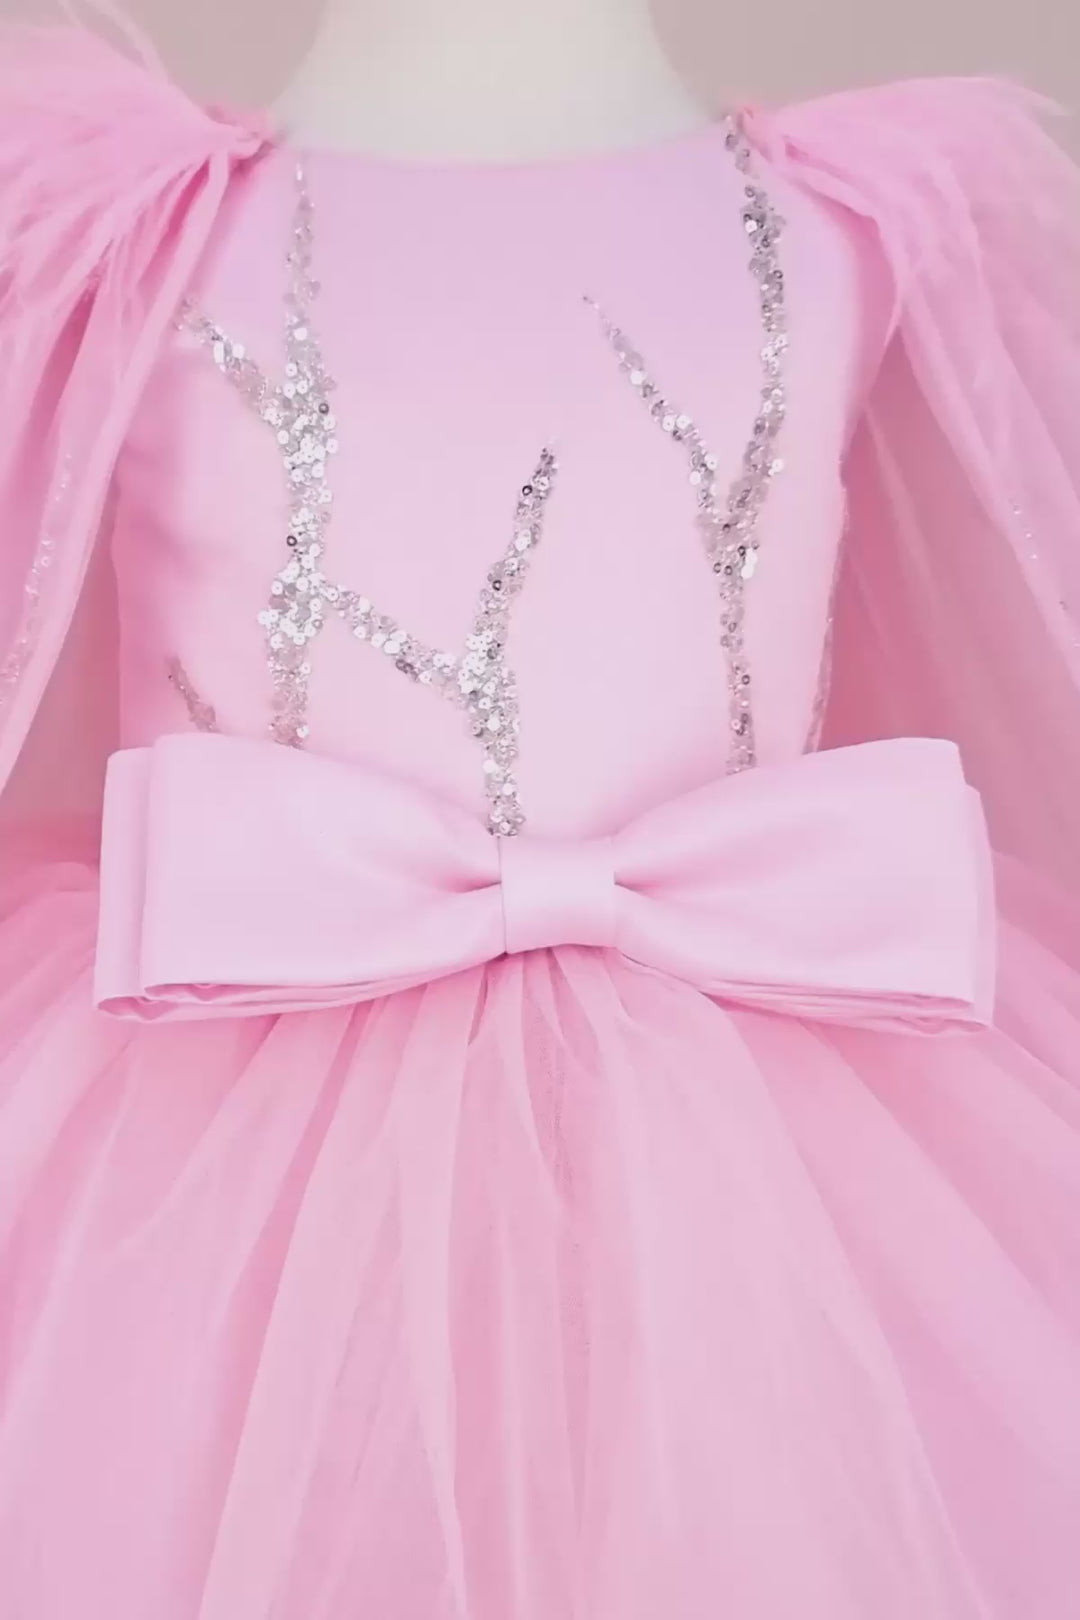 360° view of a pink birthday party dress. The dress has a knee length skirt, cape, and a pink bow at the waist. The skirt is made of layers of pink tulle